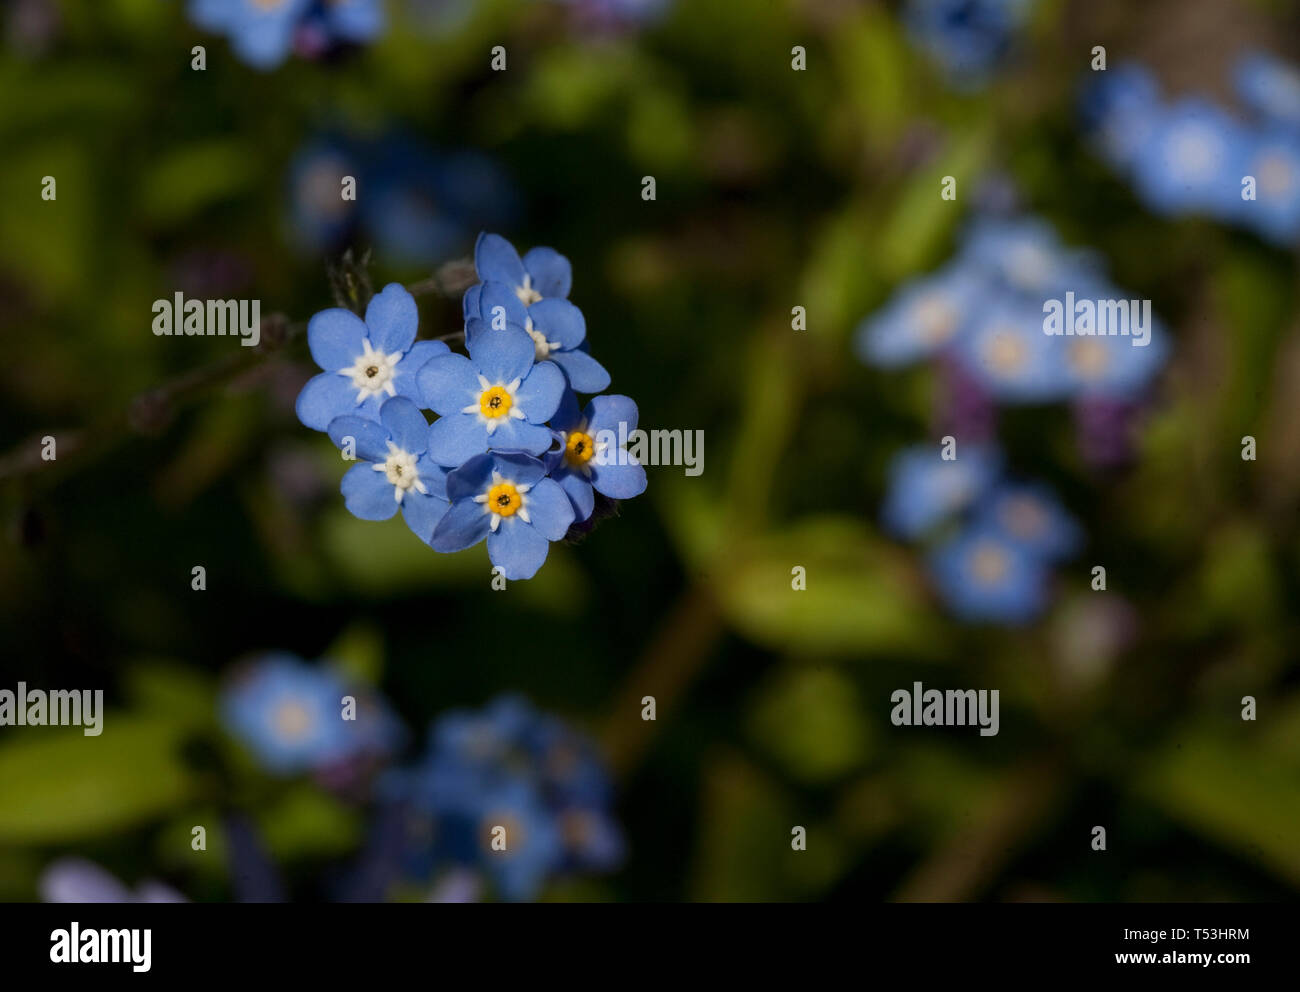 Close up view of Forget me not flowers Stock Photo